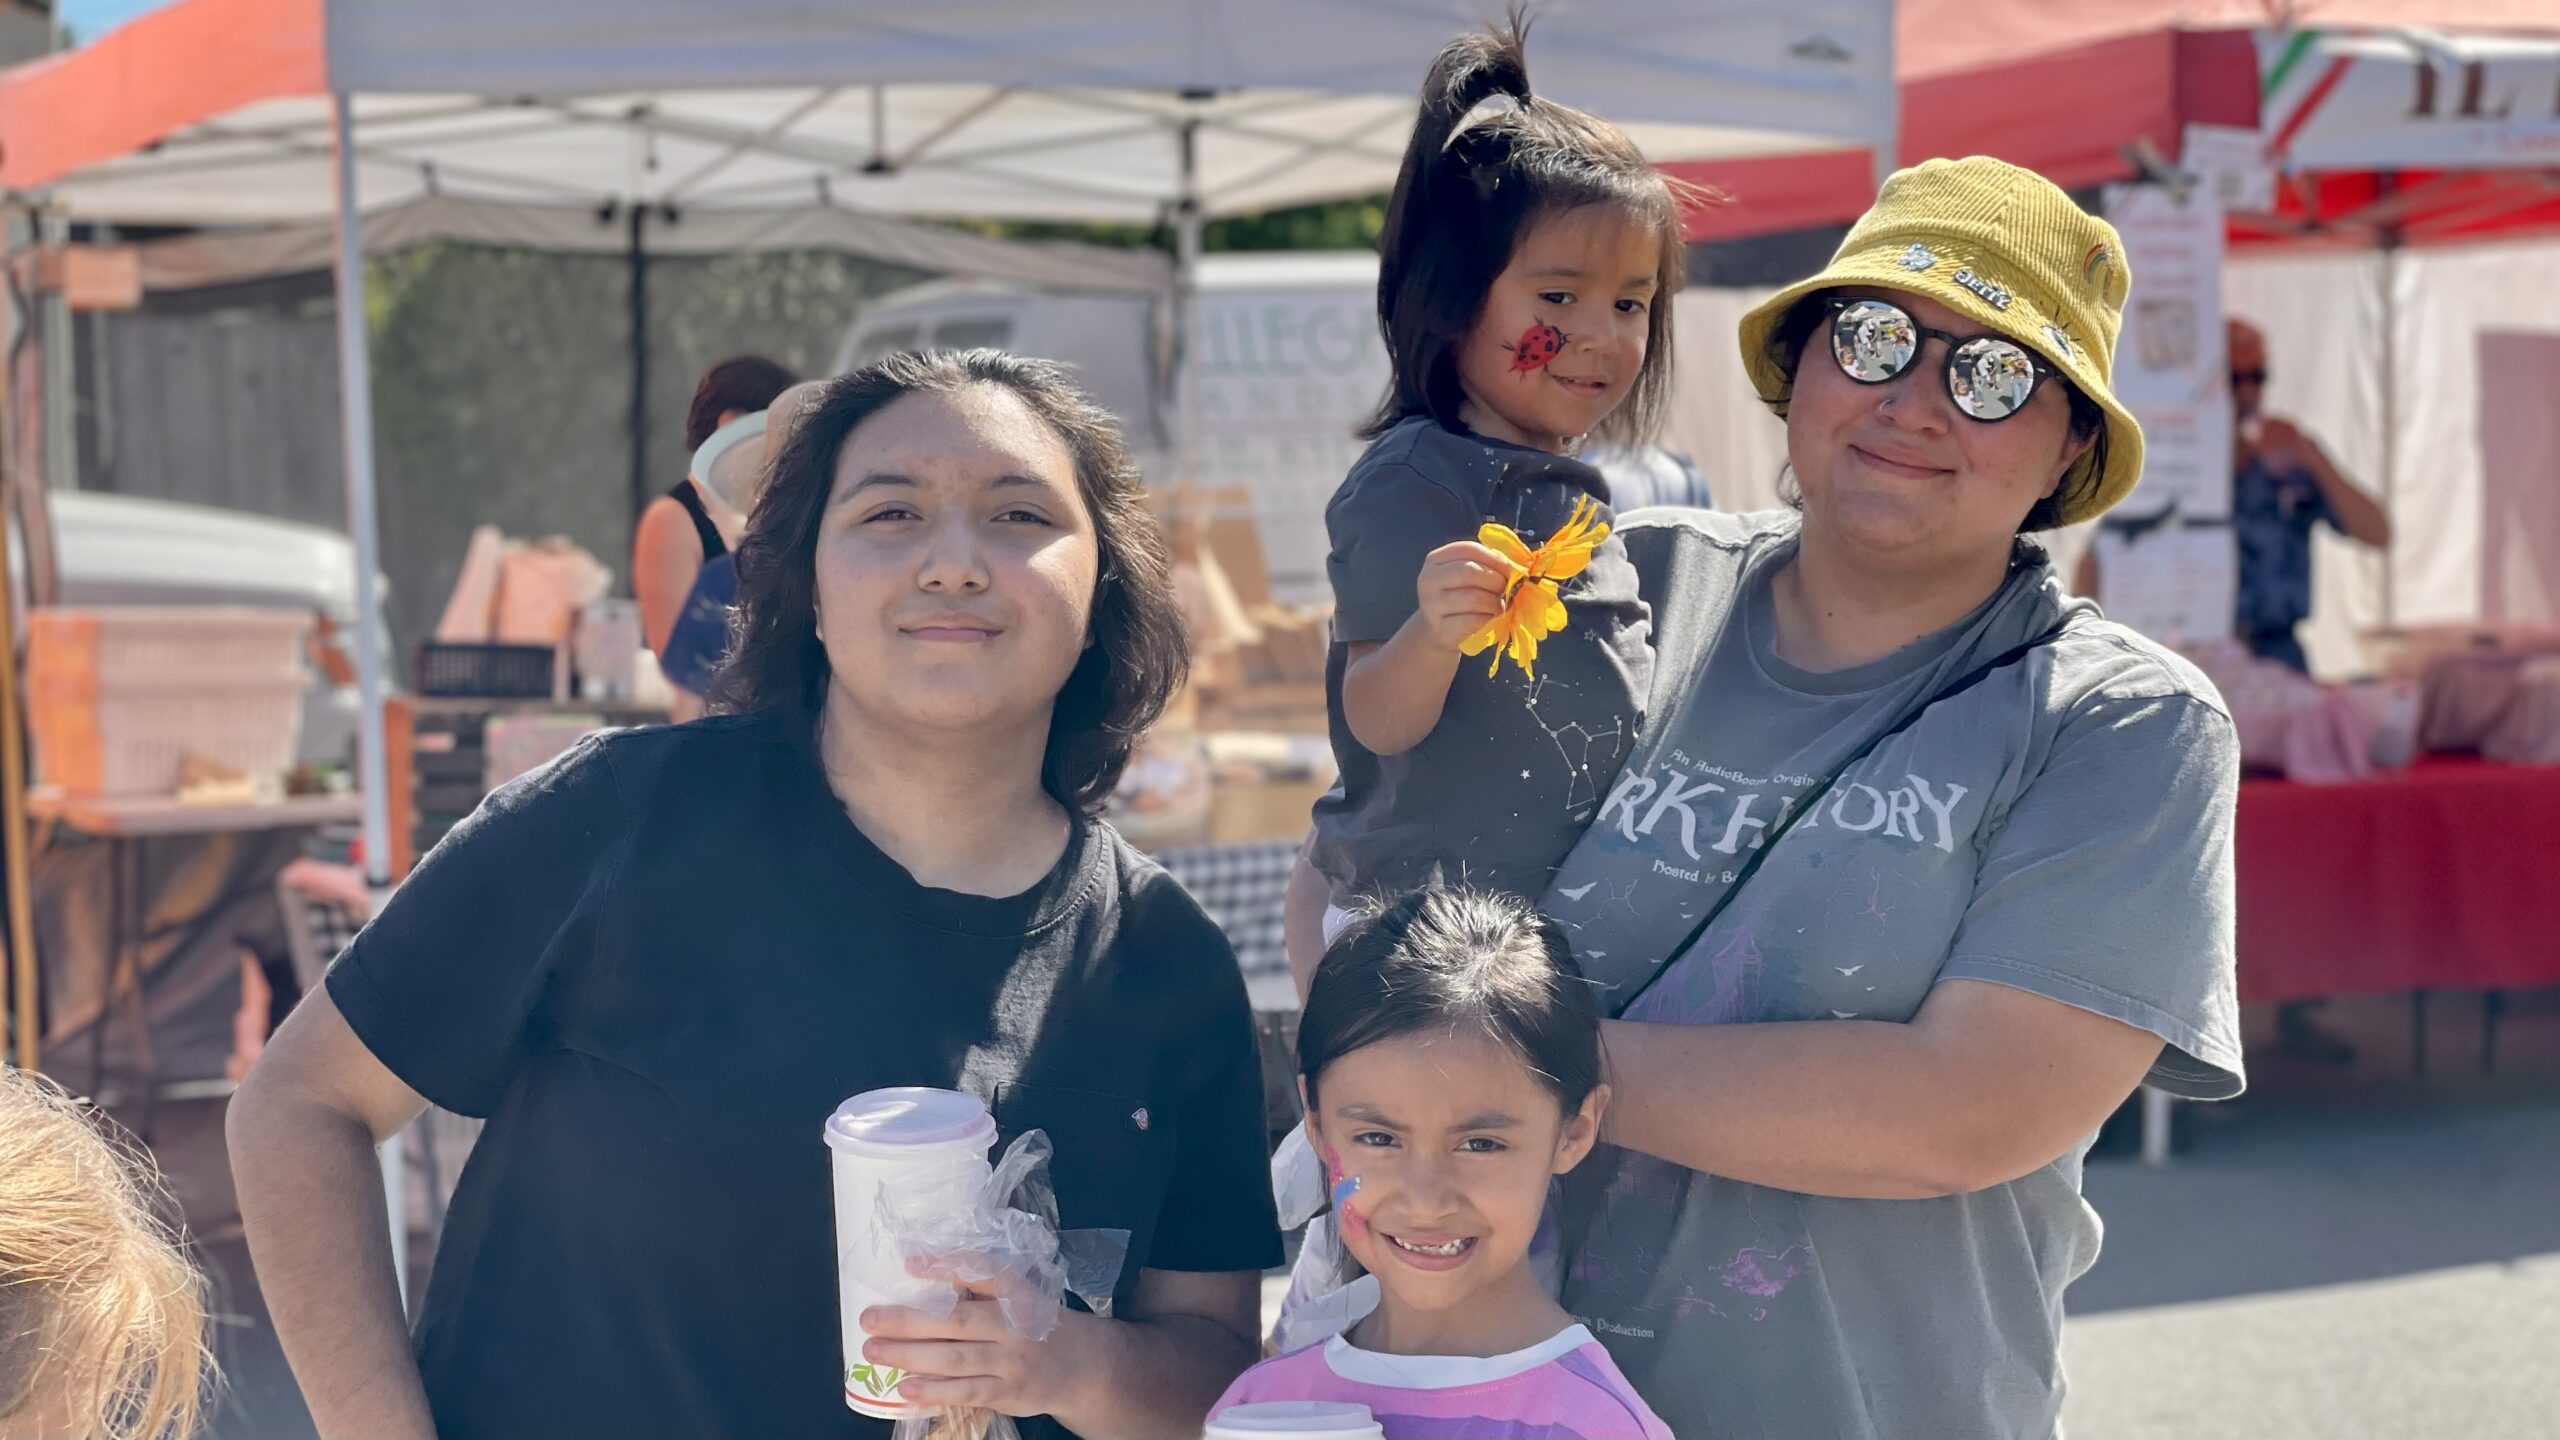 Thirty-seven-year-old Melissa Ajuntas, right, moved to California from Texas for a safer and more inclusive community. She stands with her children, from left, Aleena Romero, 14, Misol Hernandez, 7, and Luna Hernandez, 4.